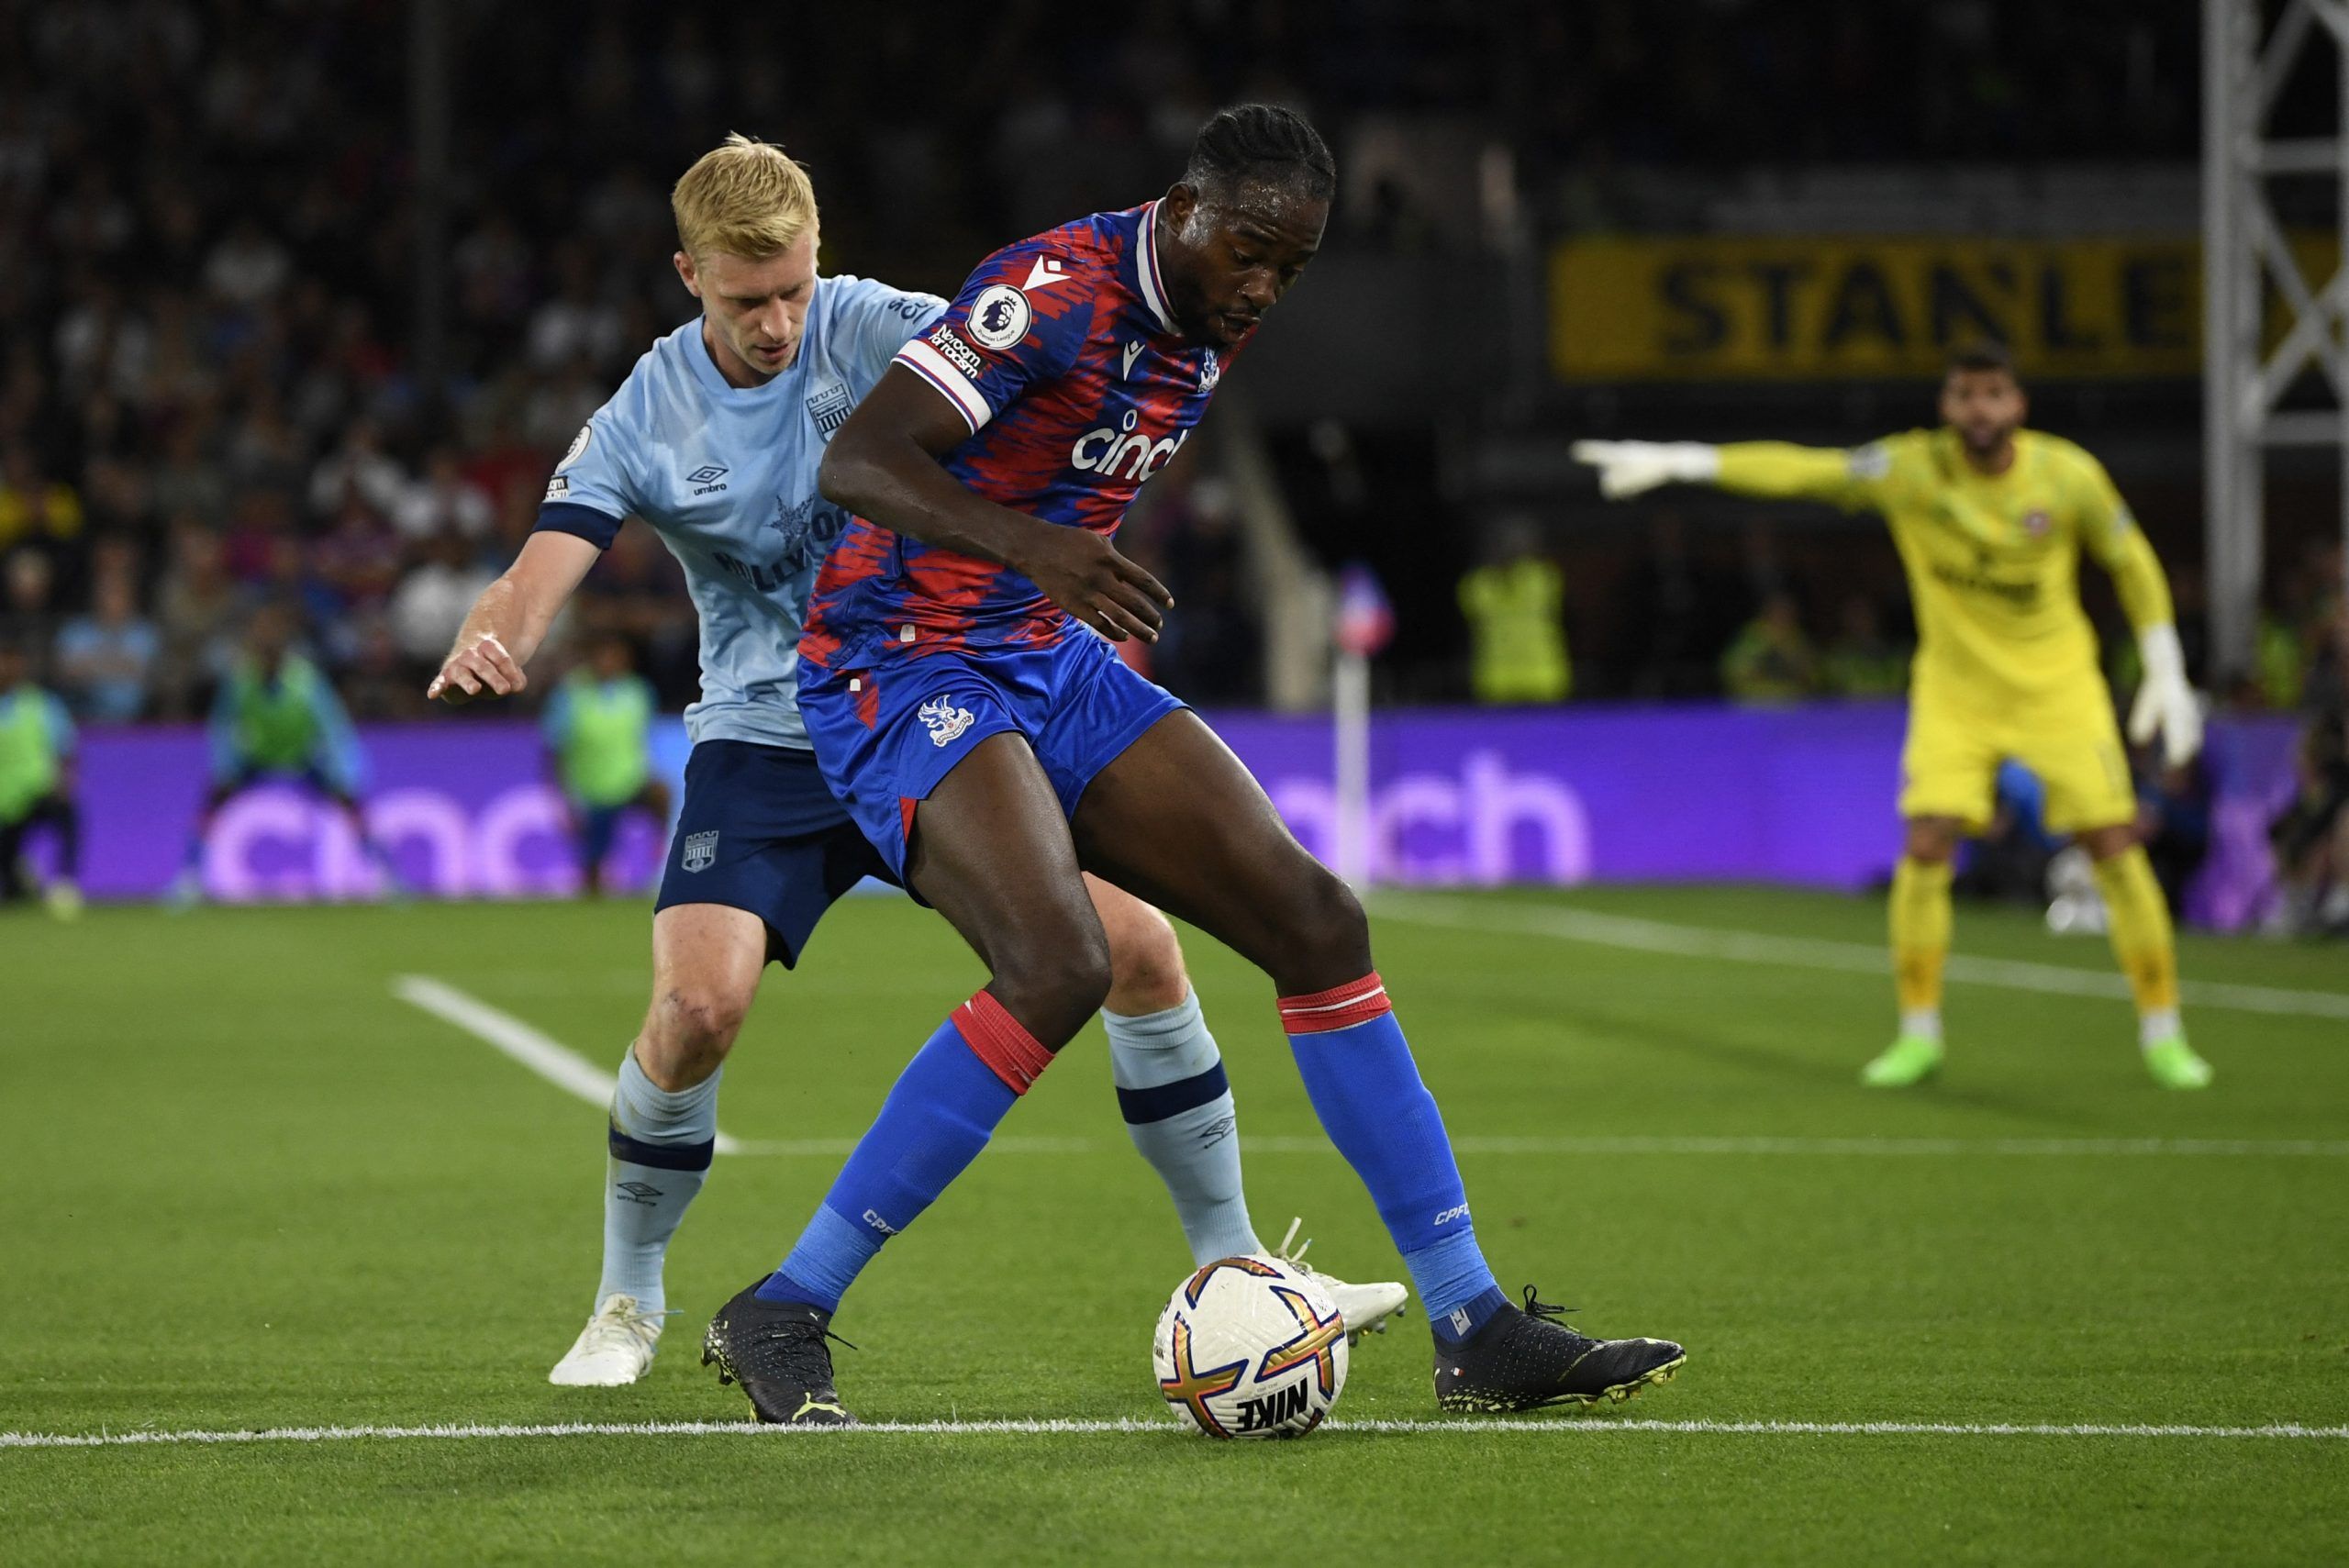 Premier League, Crystal Palace, Jean-Philippe Mateta, Crystal Palace vs Leeds United, Crystal Palace team news, CPFC news, CPFC latest news, CPFC team news, CPFC opinion